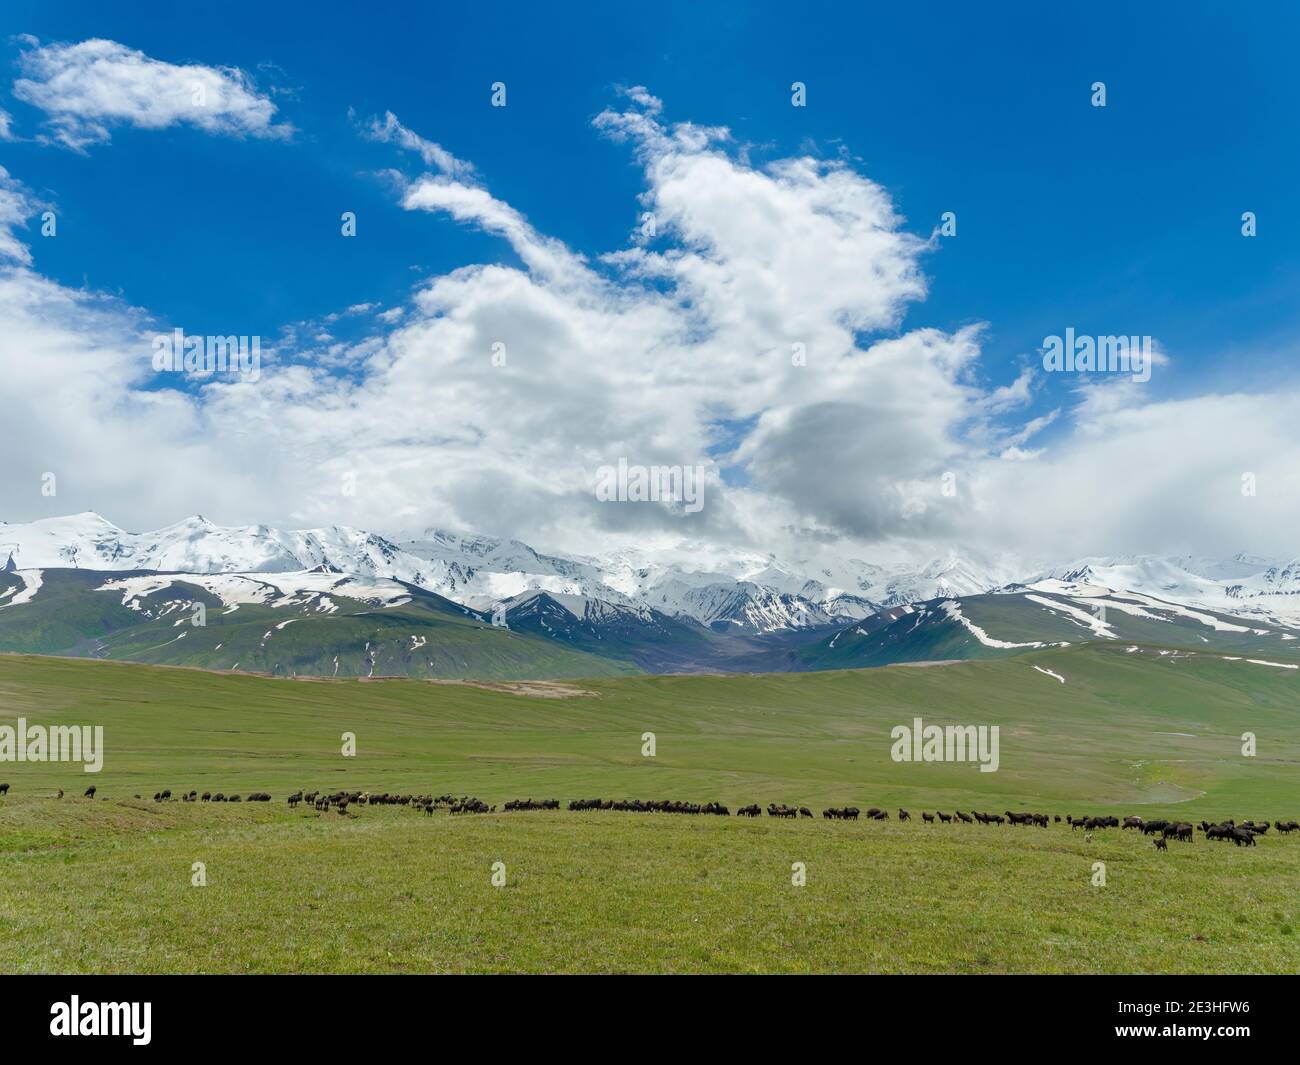 Sheep on their summer pasture. Alaj Valley in front of the Trans-Alay mountain range in the Pamir mountains. Asia, central Asia, Kyrgyzstan Stock Photo